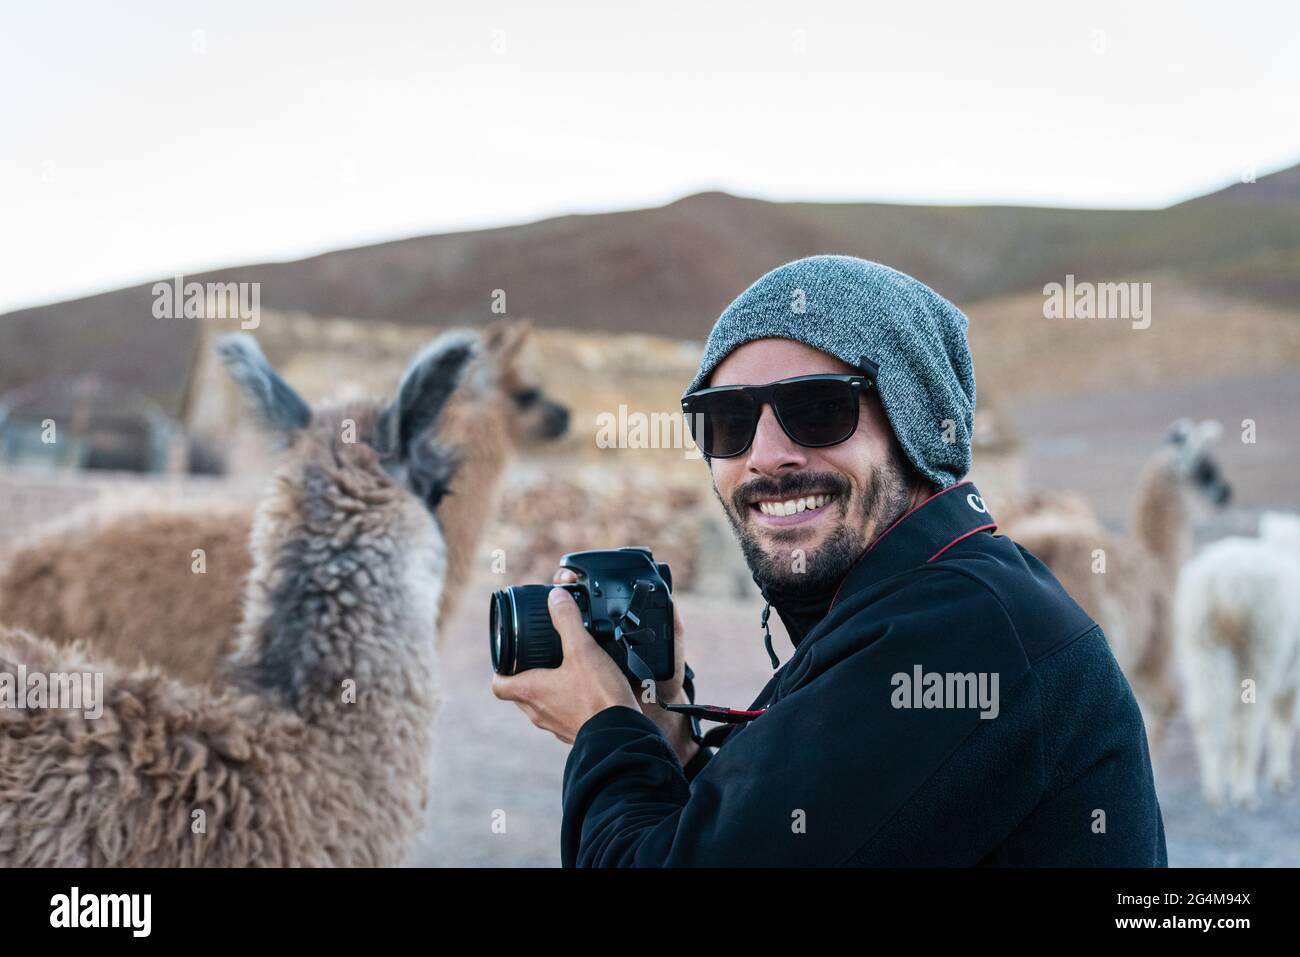 A young man wearing sunglasses and a hut smiles next to a llama with his camera in the Andean altiplano, in Bolivia. Stock Photo